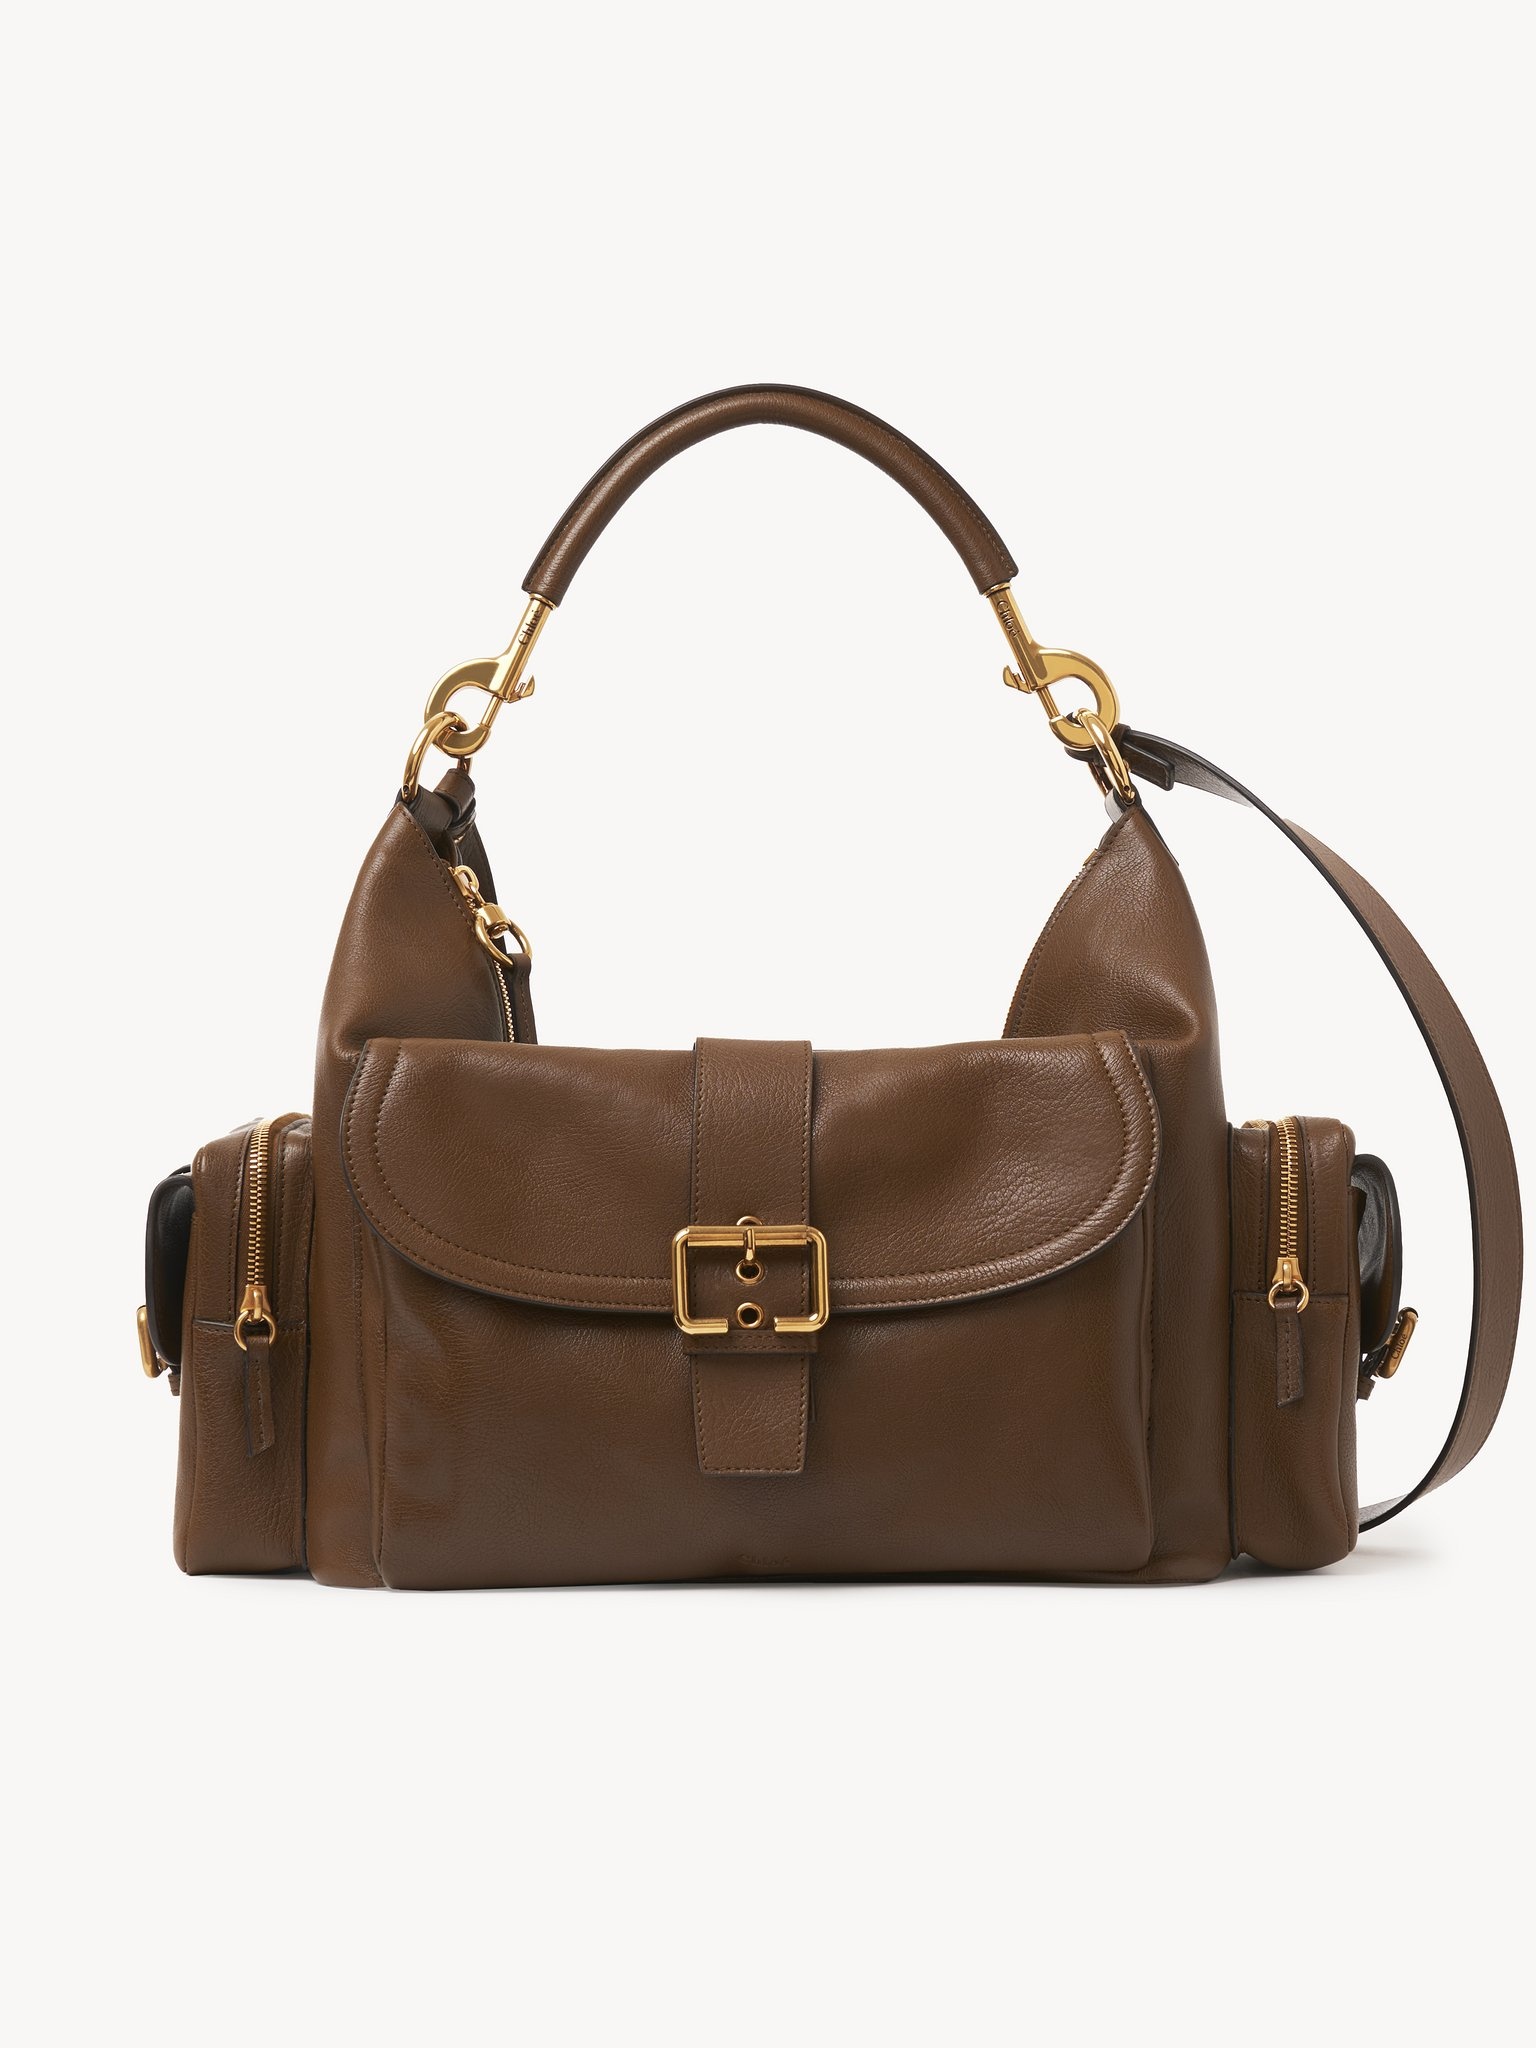 LARGE CAMERA BAG IN SOFT LEATHER - 1